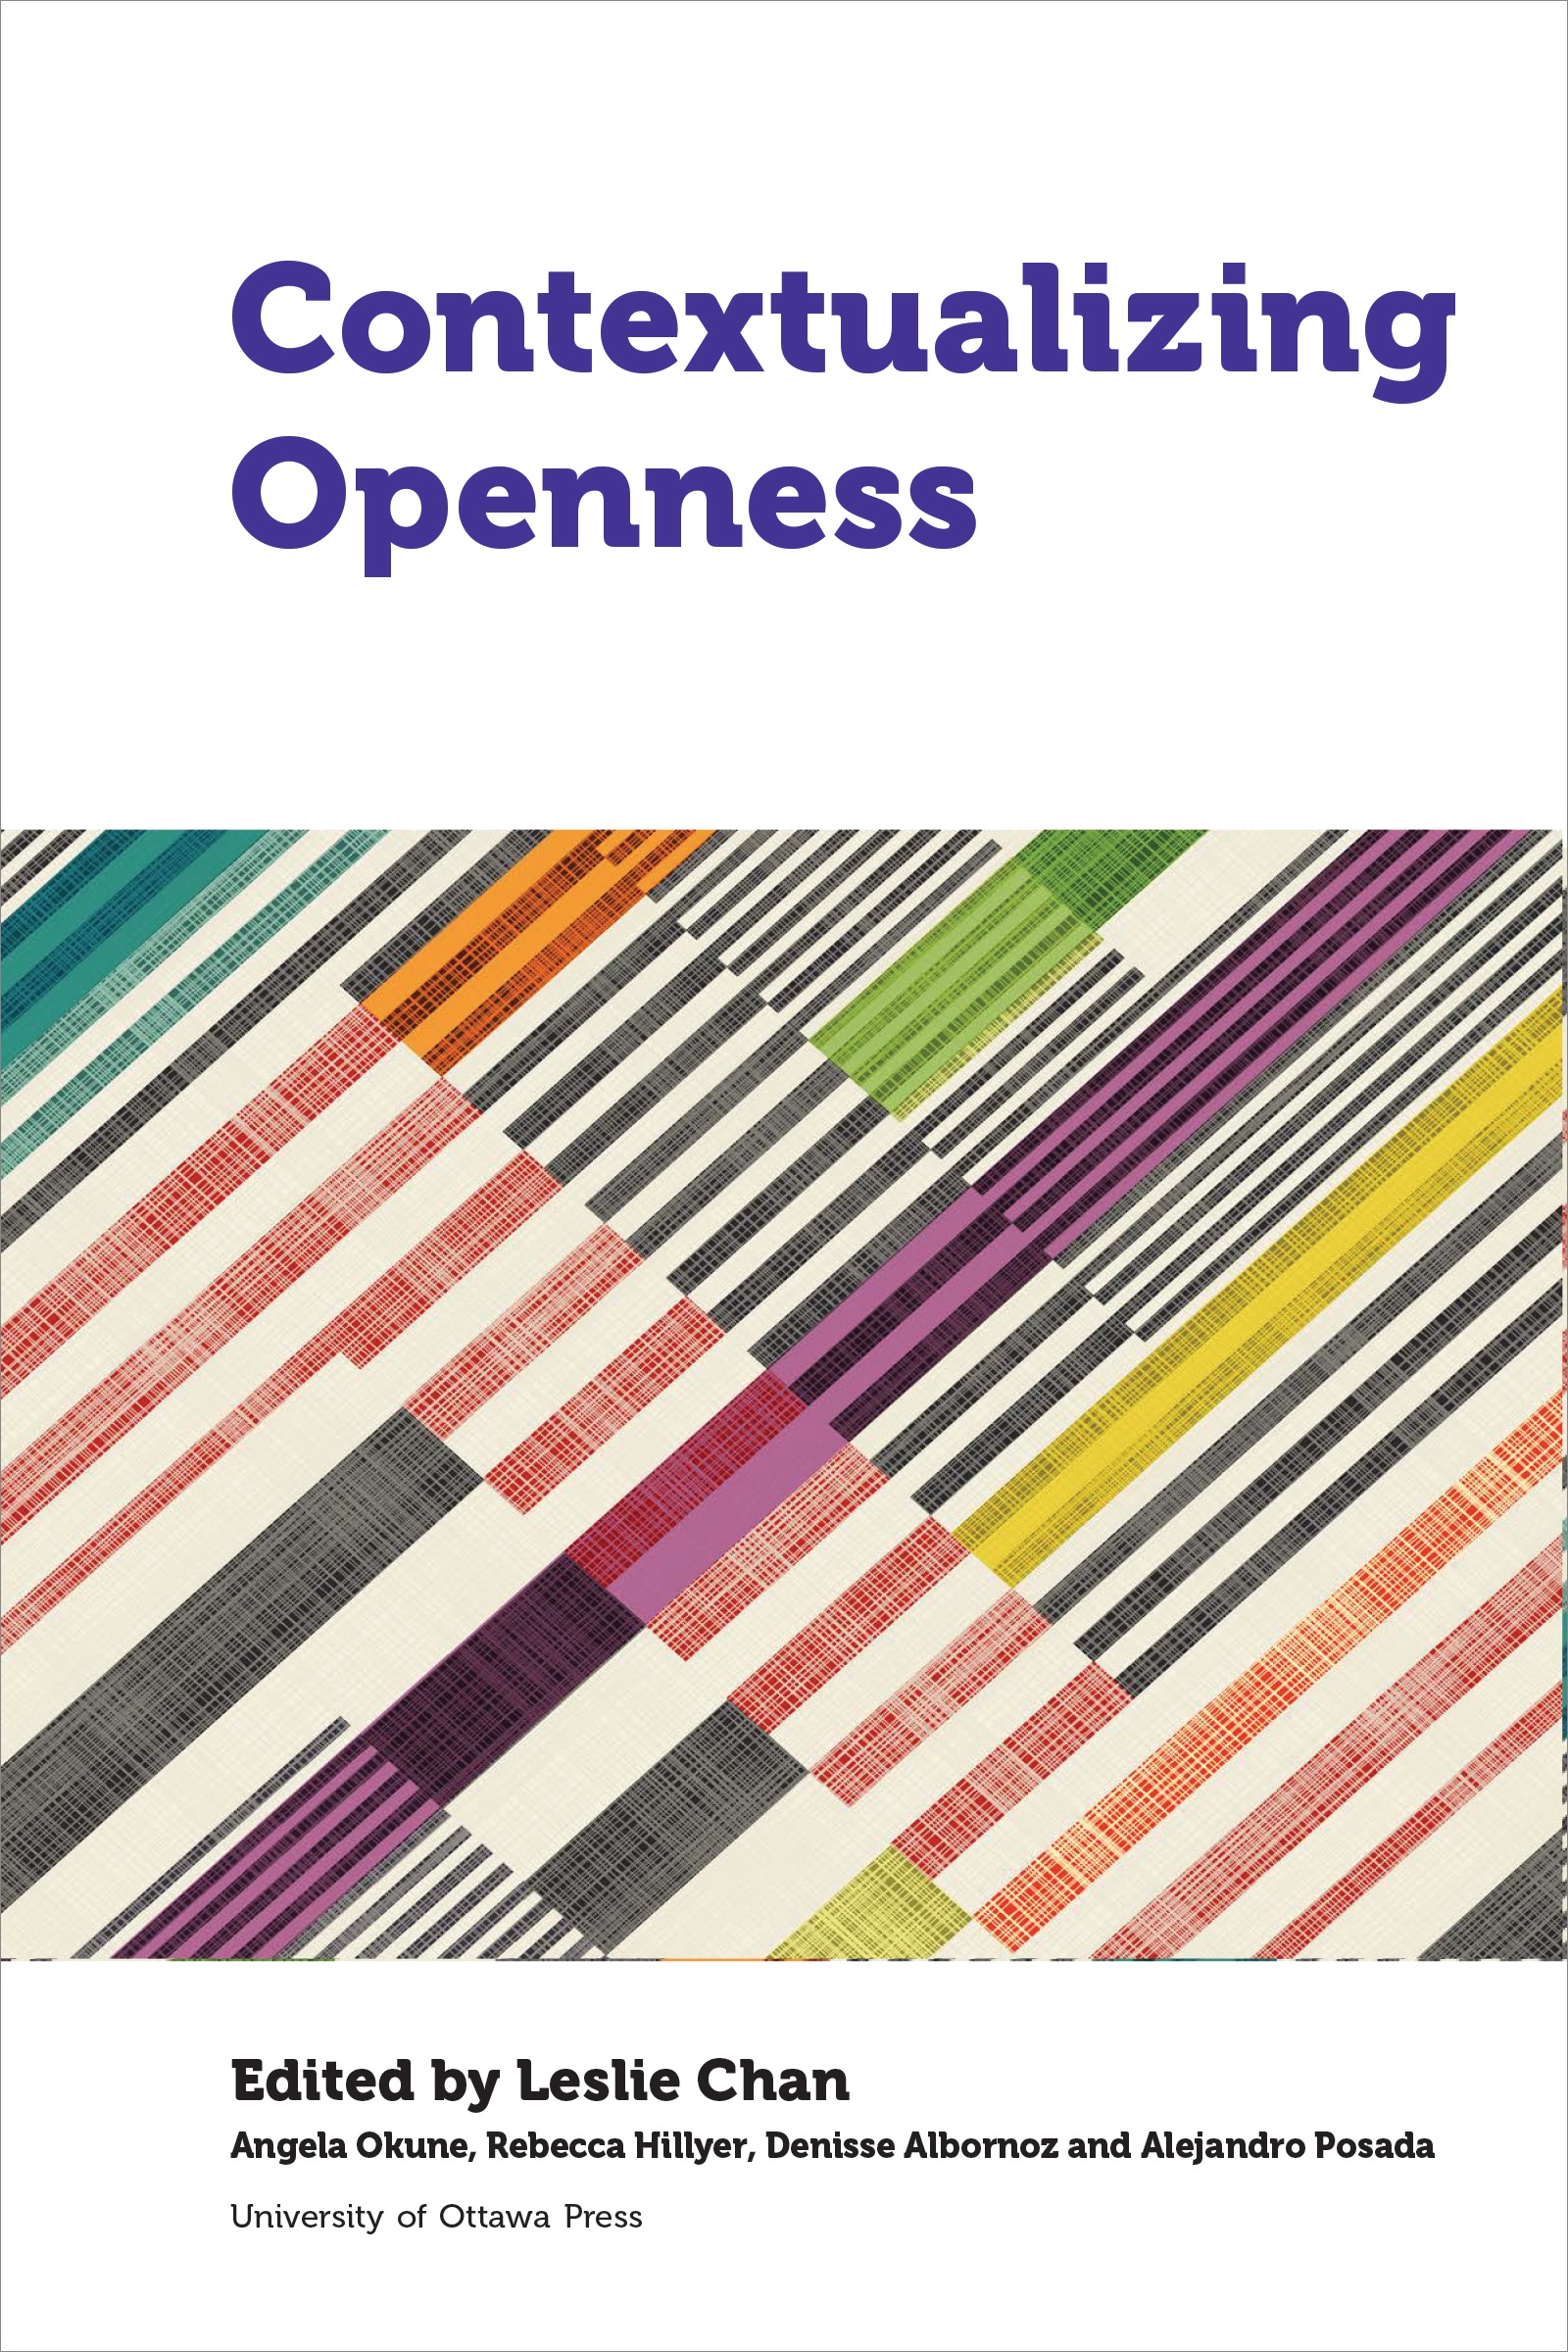 Book published: Contextualizing Openness: Situating Open Science